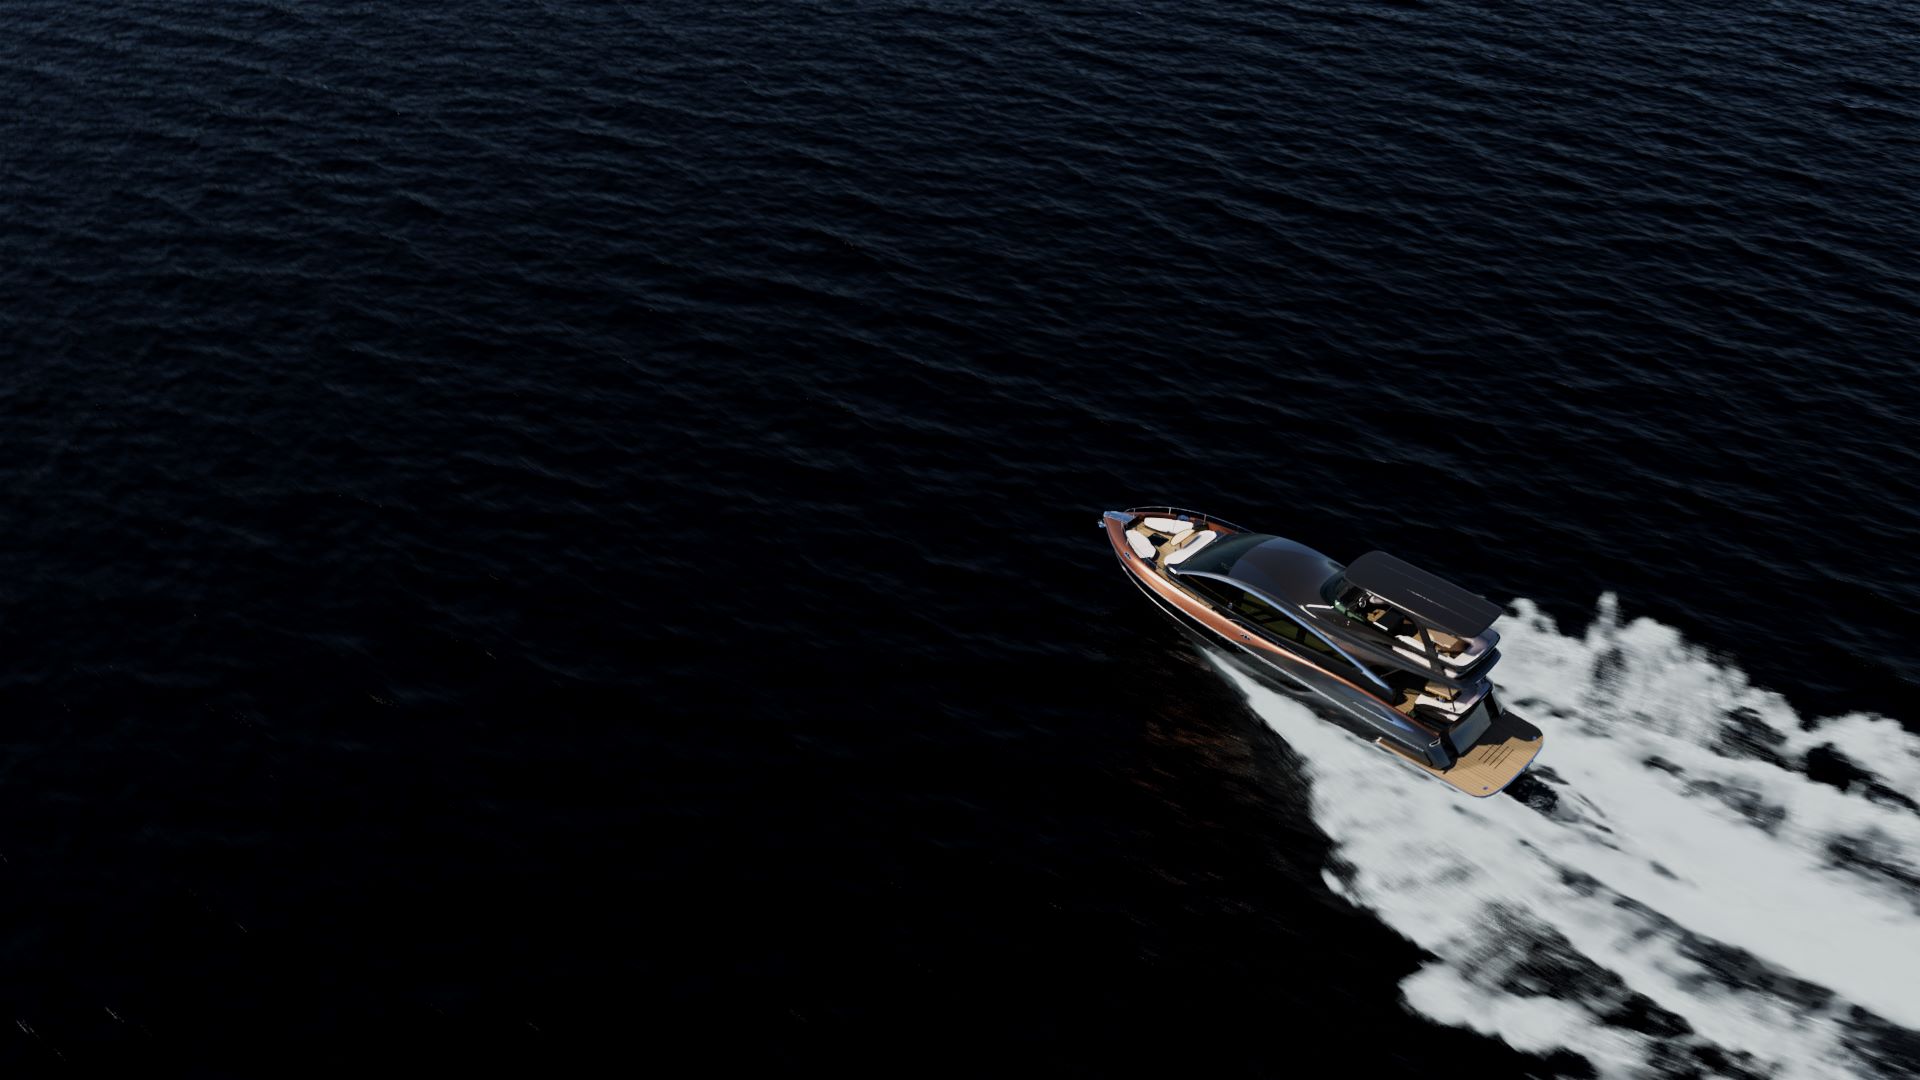 Overhead view of the Lexus LY 680 yacht on the water.